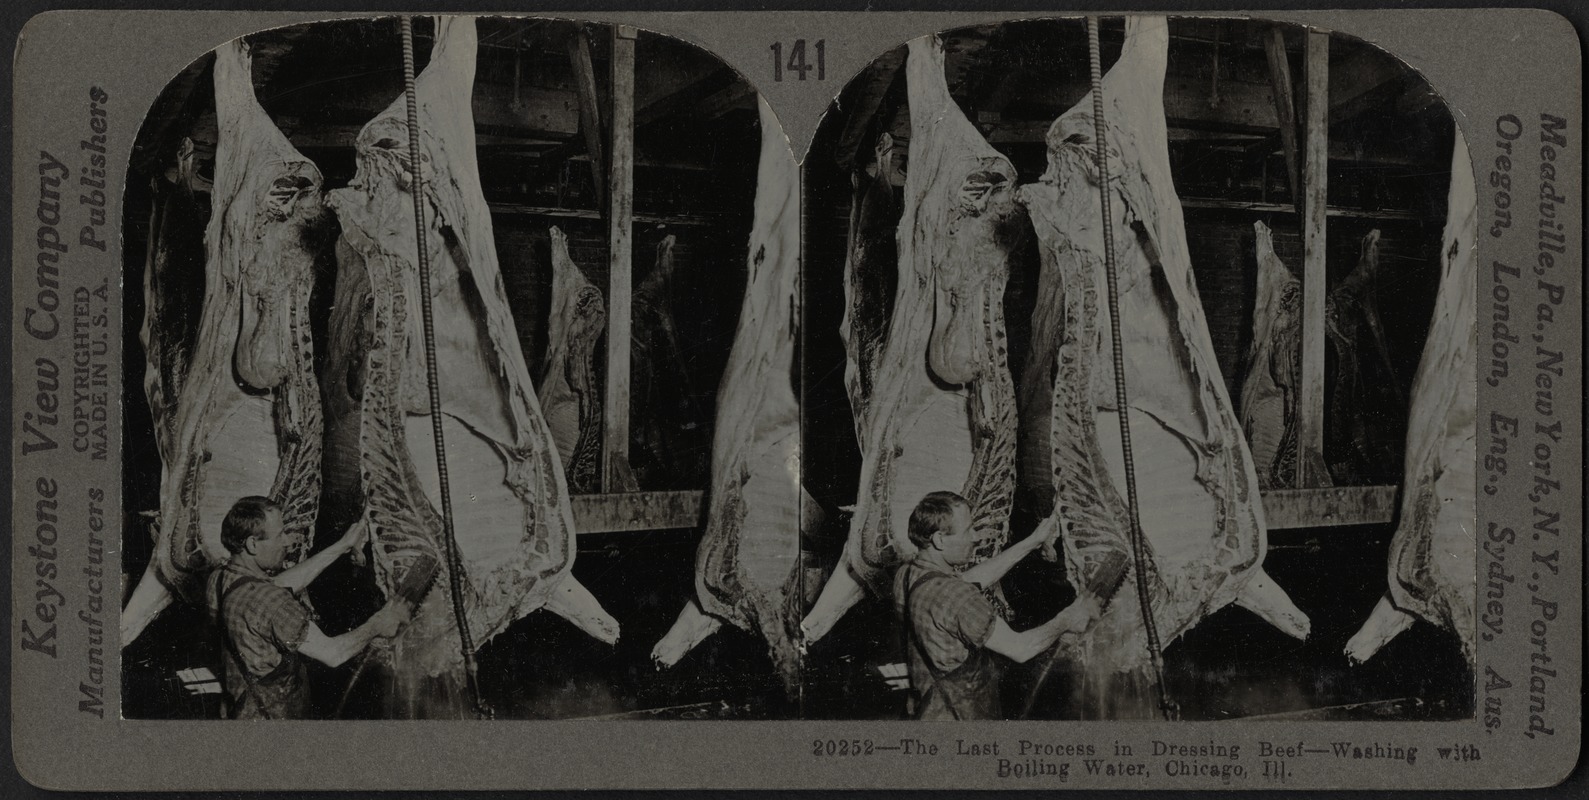 The last process in dressing beef, Chicago, Illinois